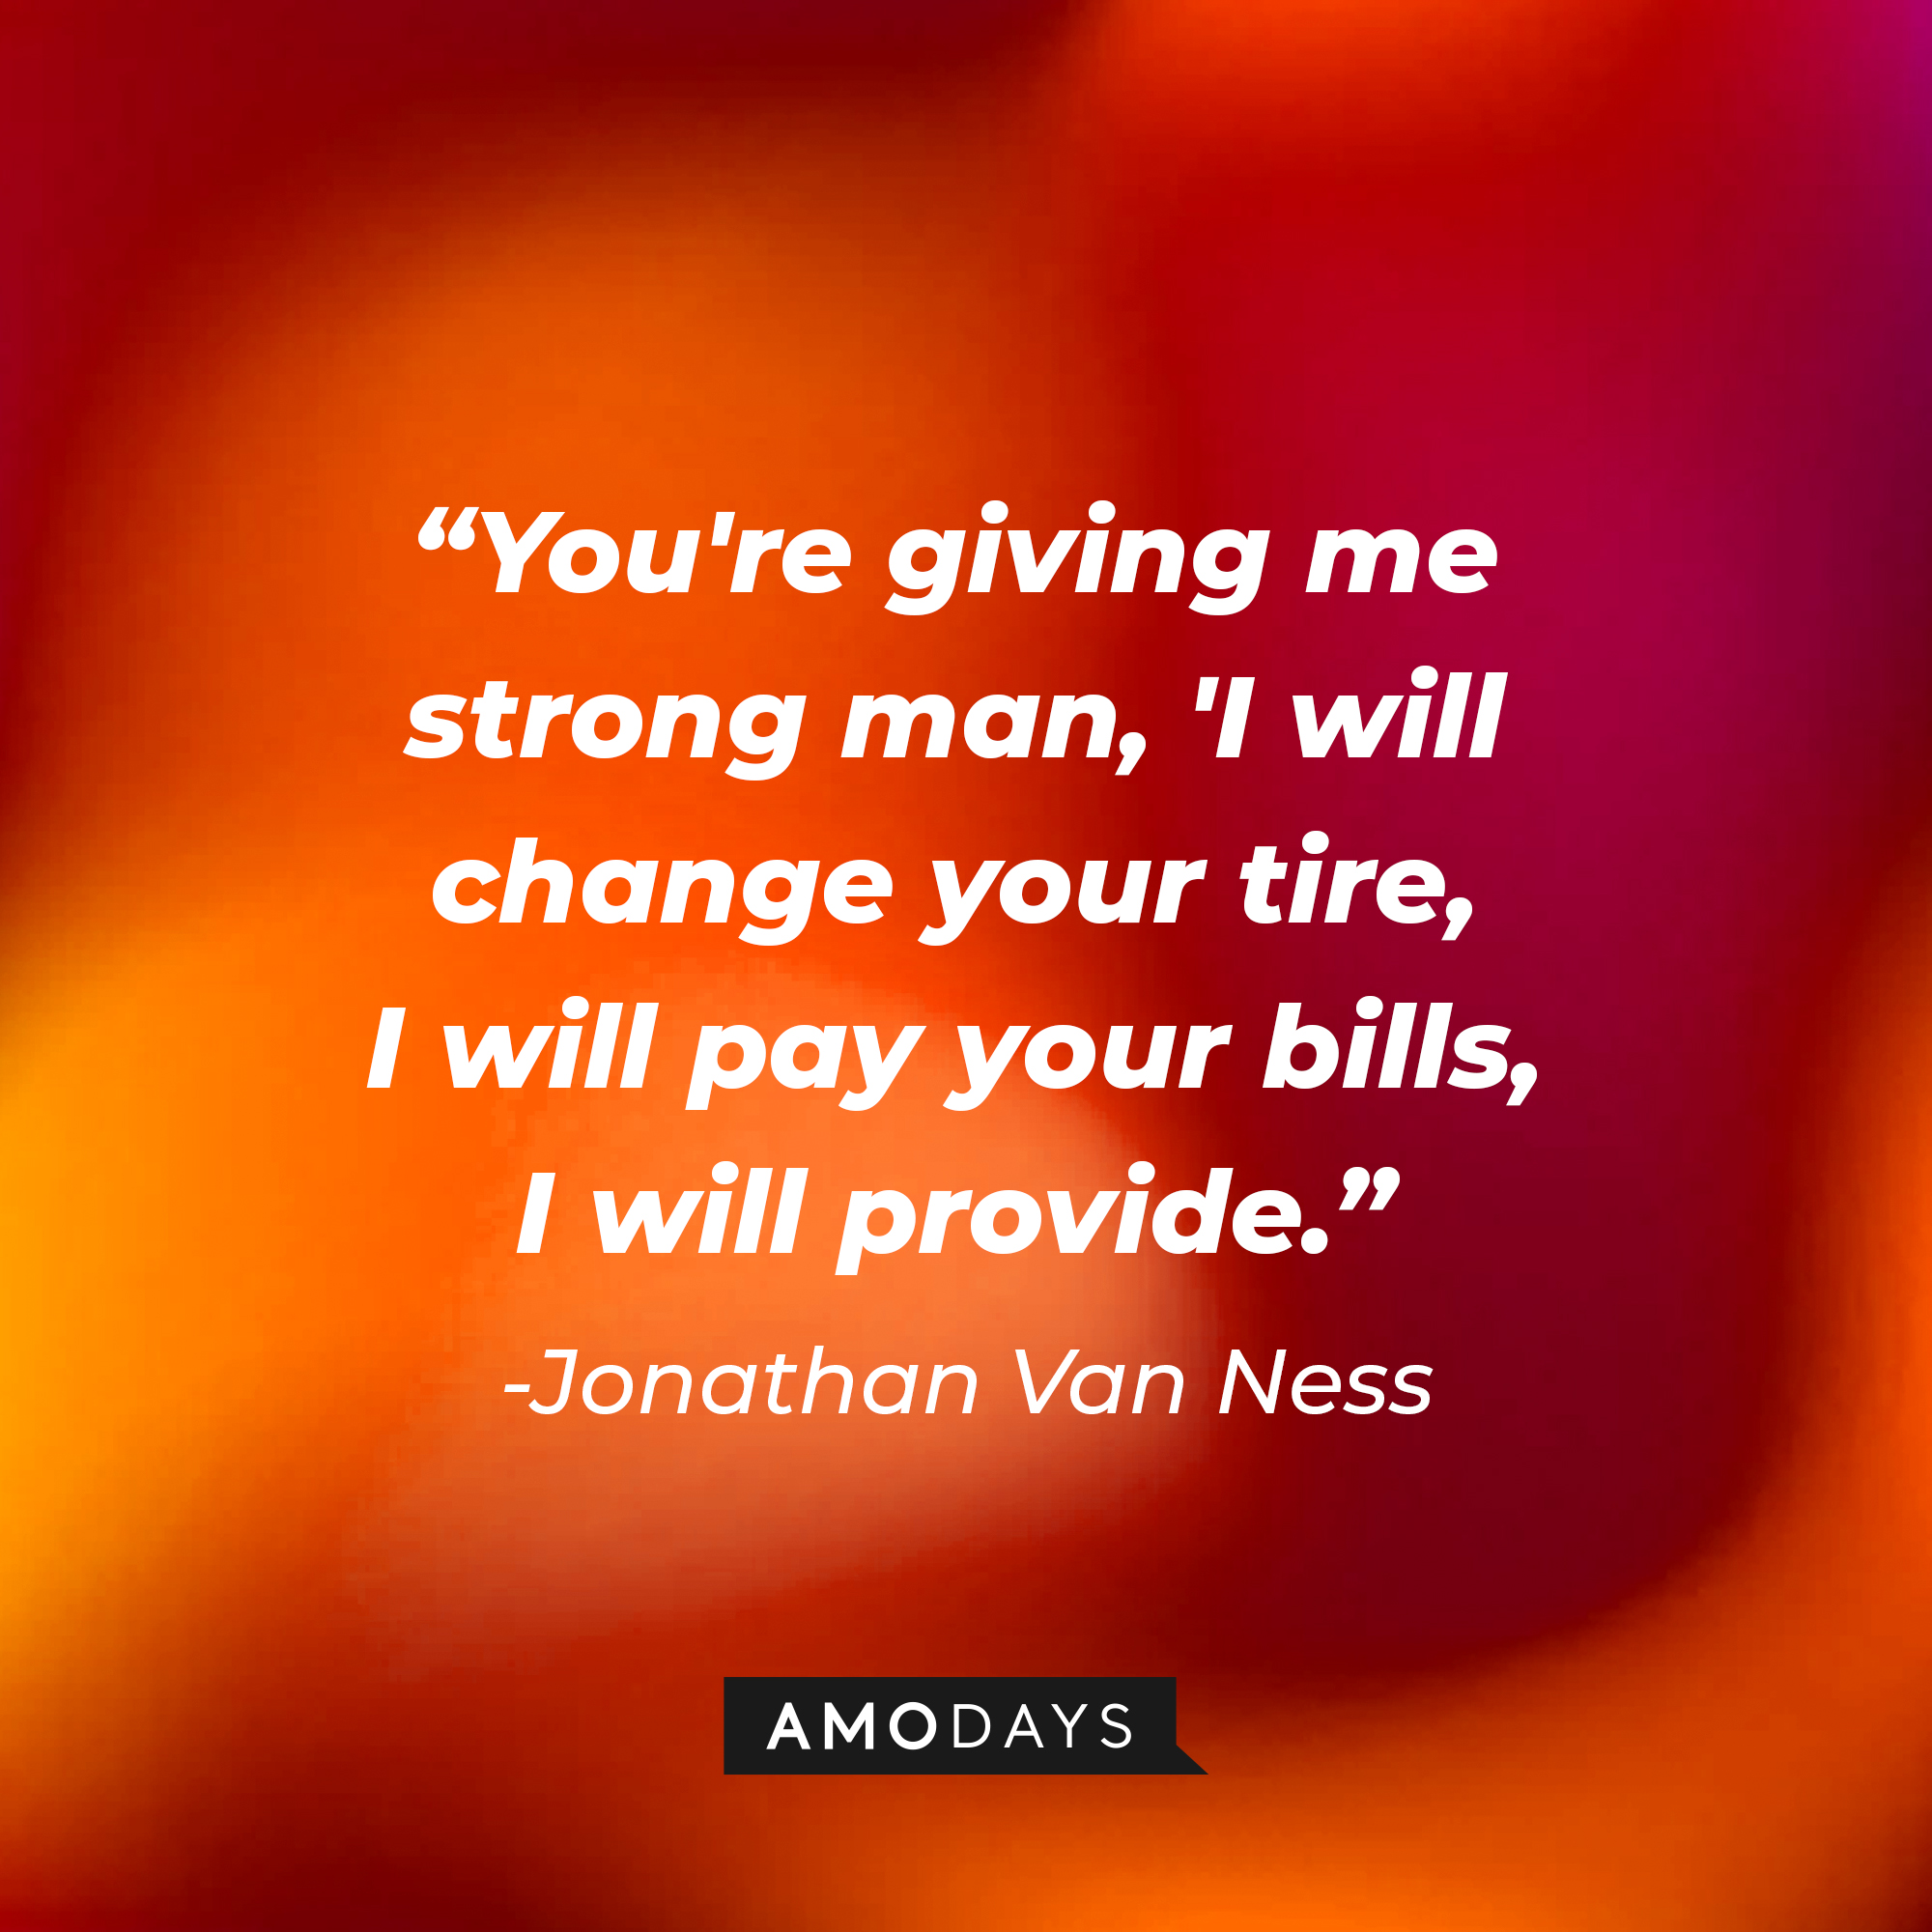 Jonathan Van Ness’ quote: "You're giving me strong man, 'I will change your tire, I will pay your bills, I will provide." | Image: AmoDays